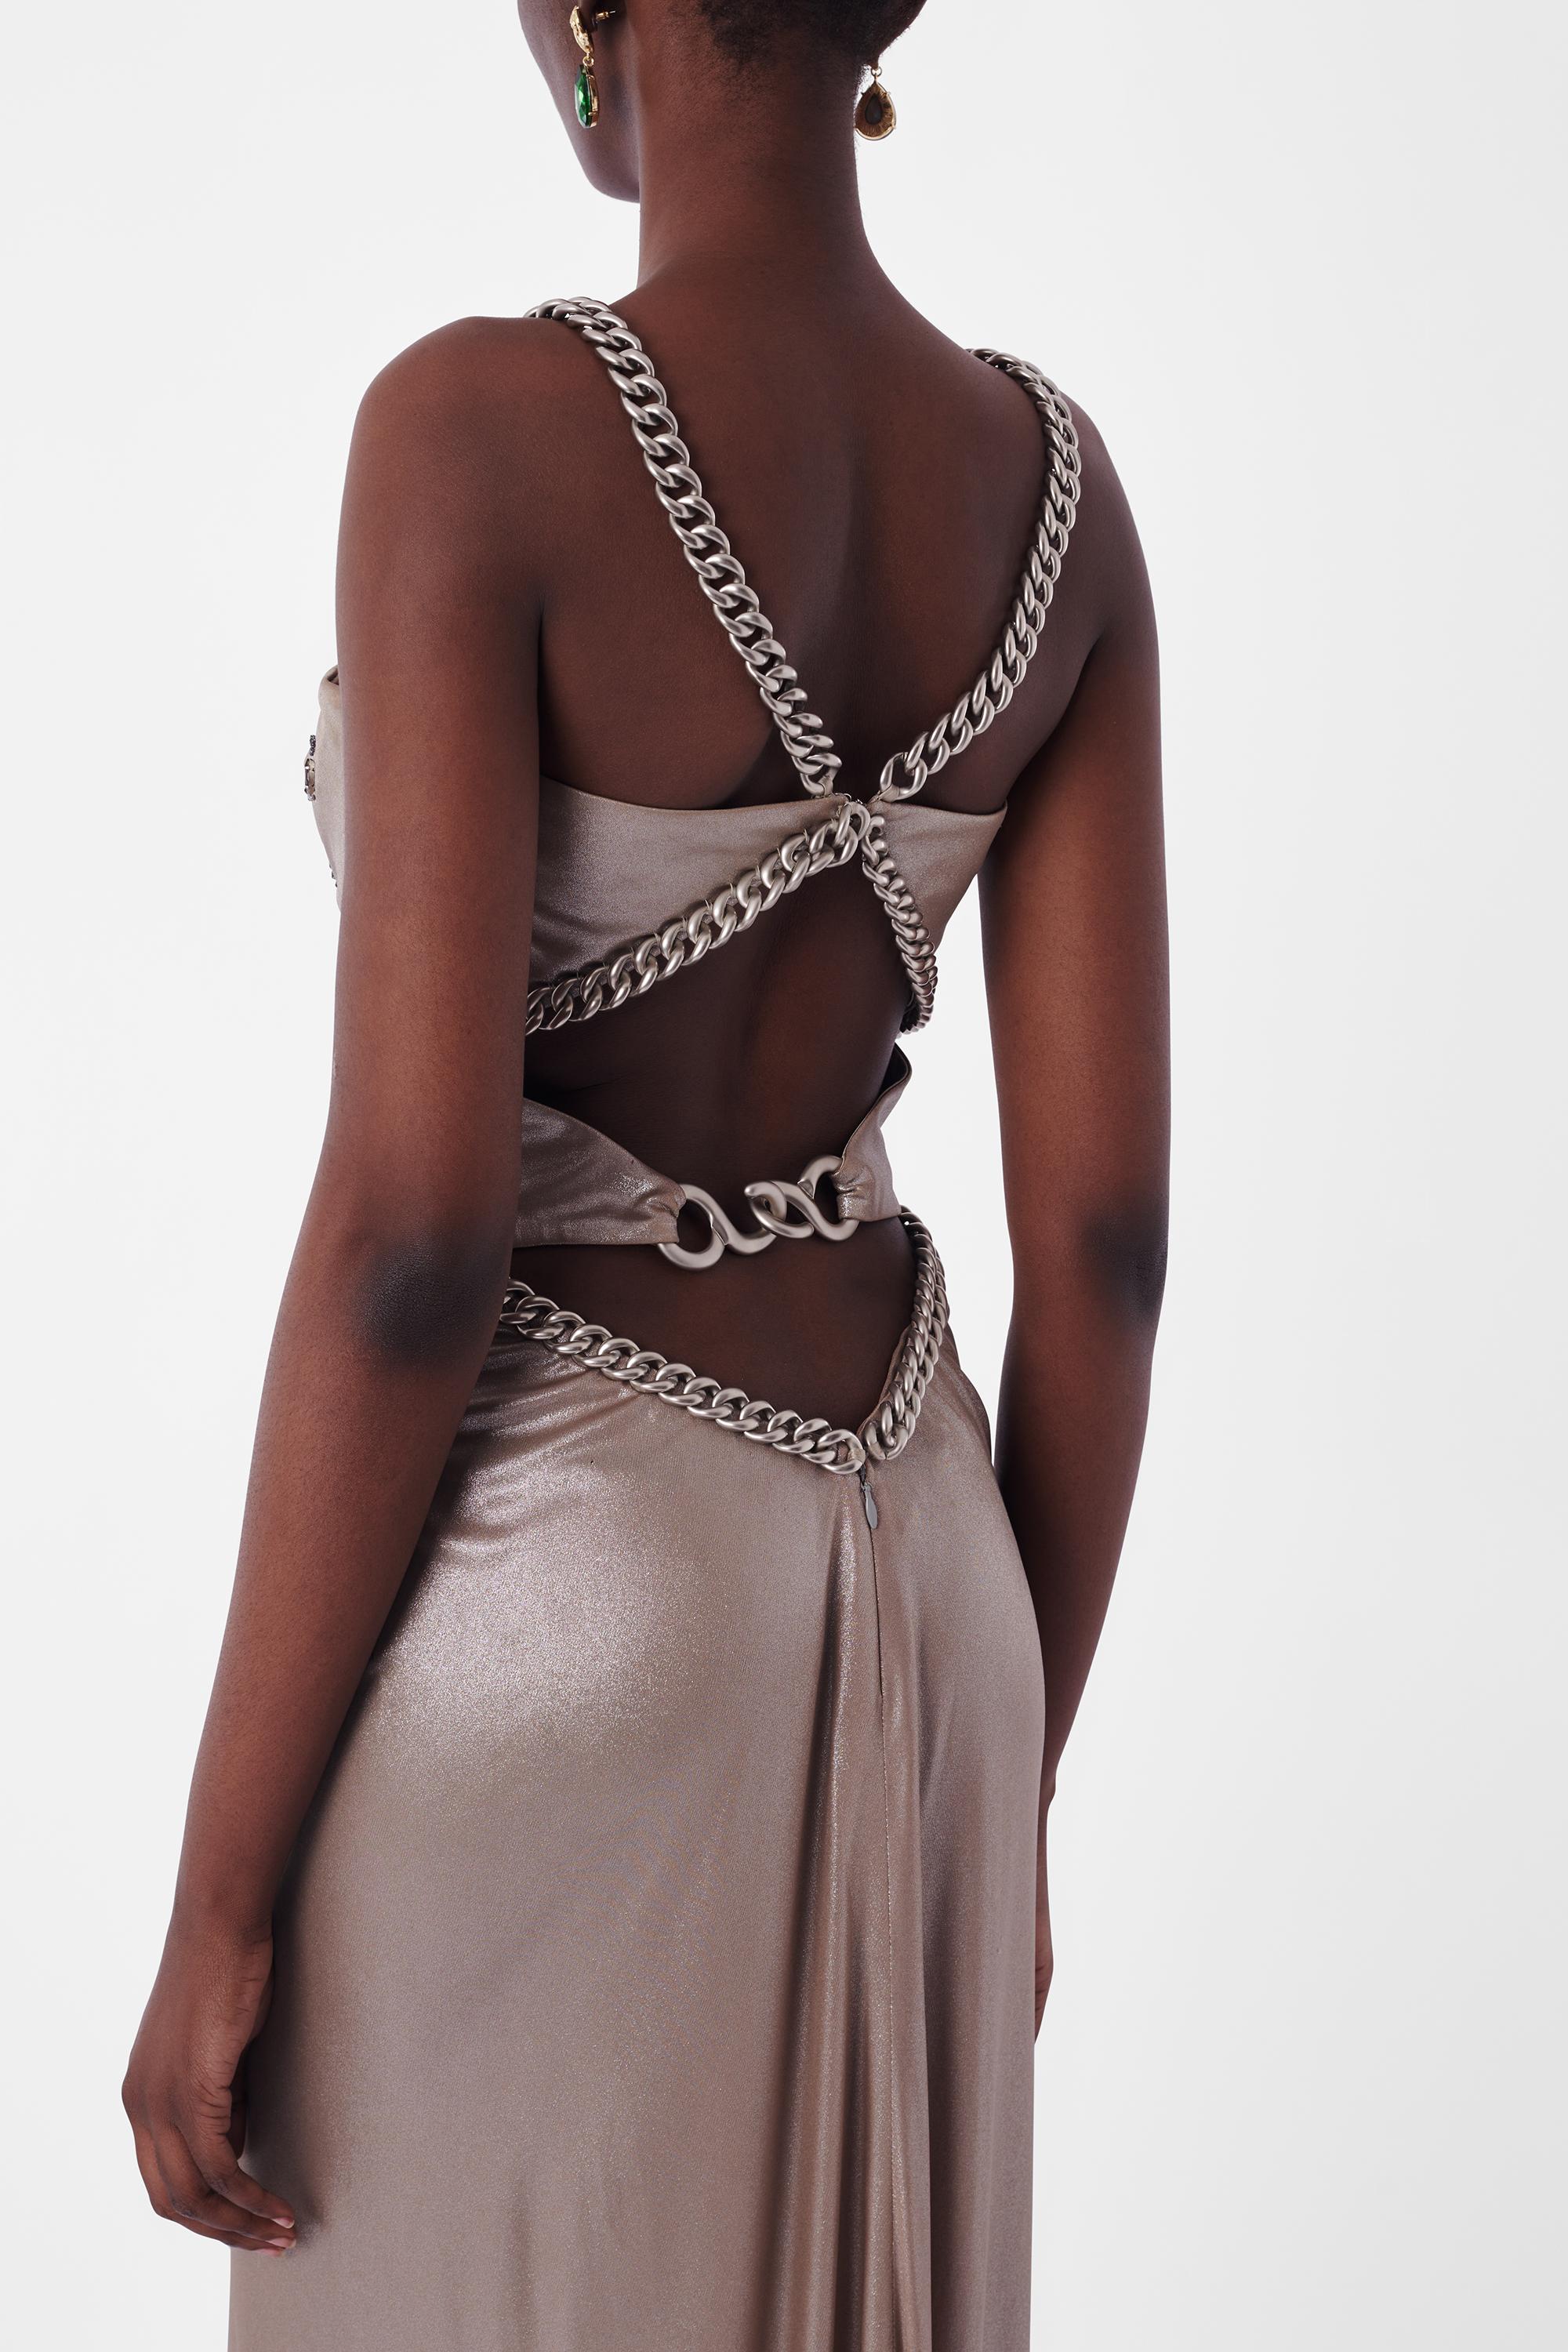 We are excited to present this vintage Versace 1990's Silver Metallic Chain Gown. Features silver chain cross back straps and waist belt, open cutout back, silver embroidered beads on chest and maxi length. In excellent vintage condition.